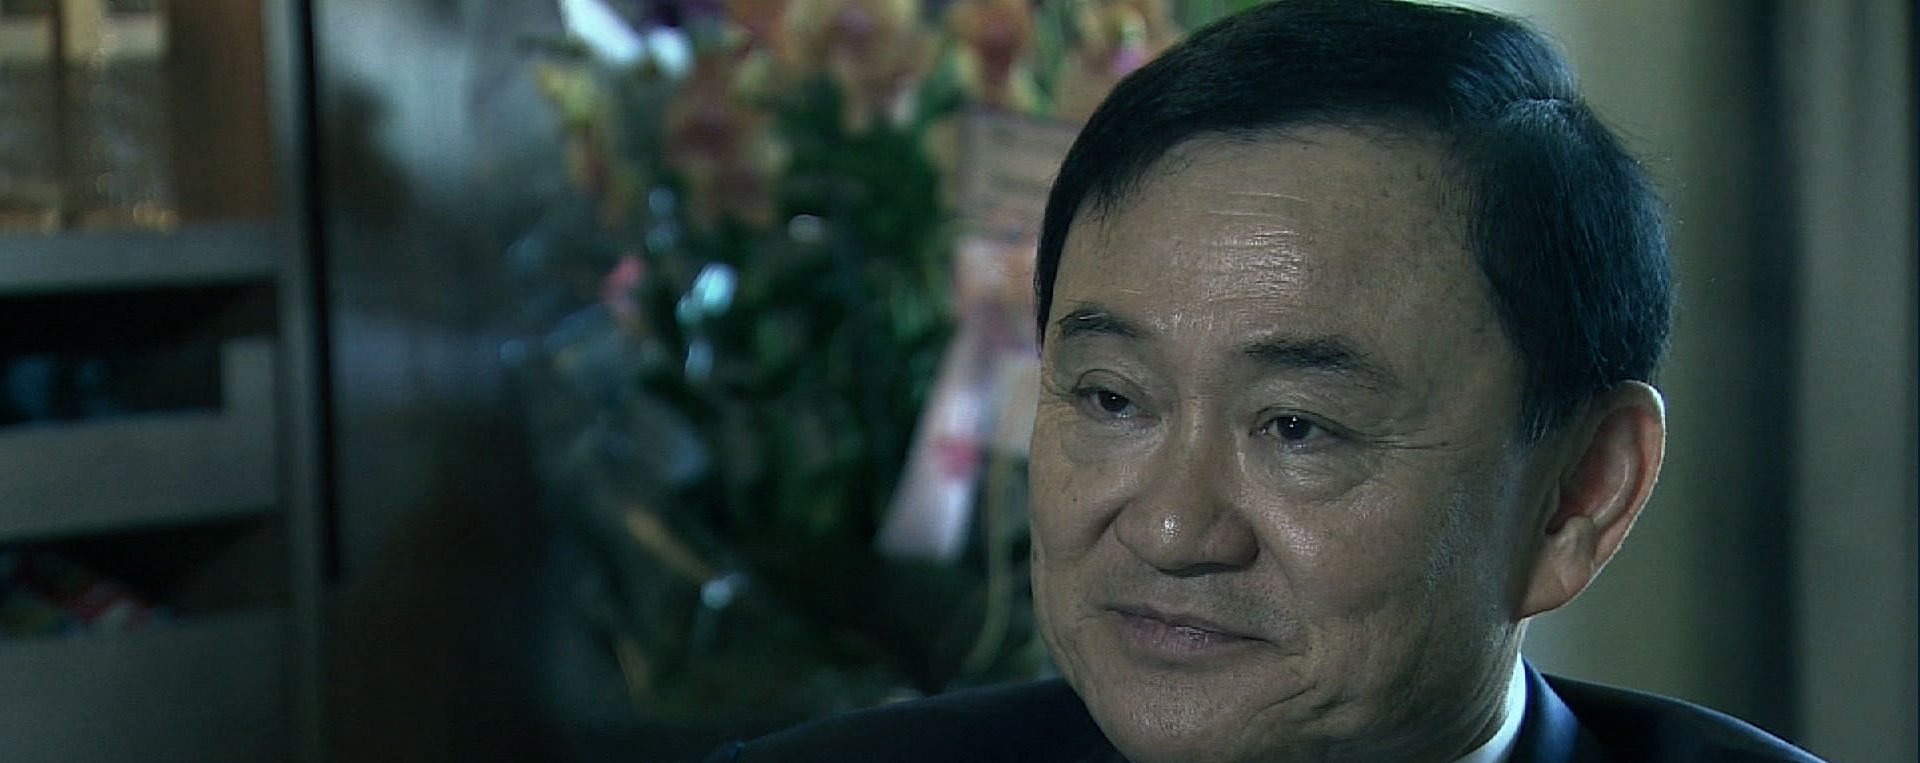 Thaksin Shinawatra, Former Prime Minister of Thailand, Former Thai Police Colonel: Turned Billionaire Tycoon